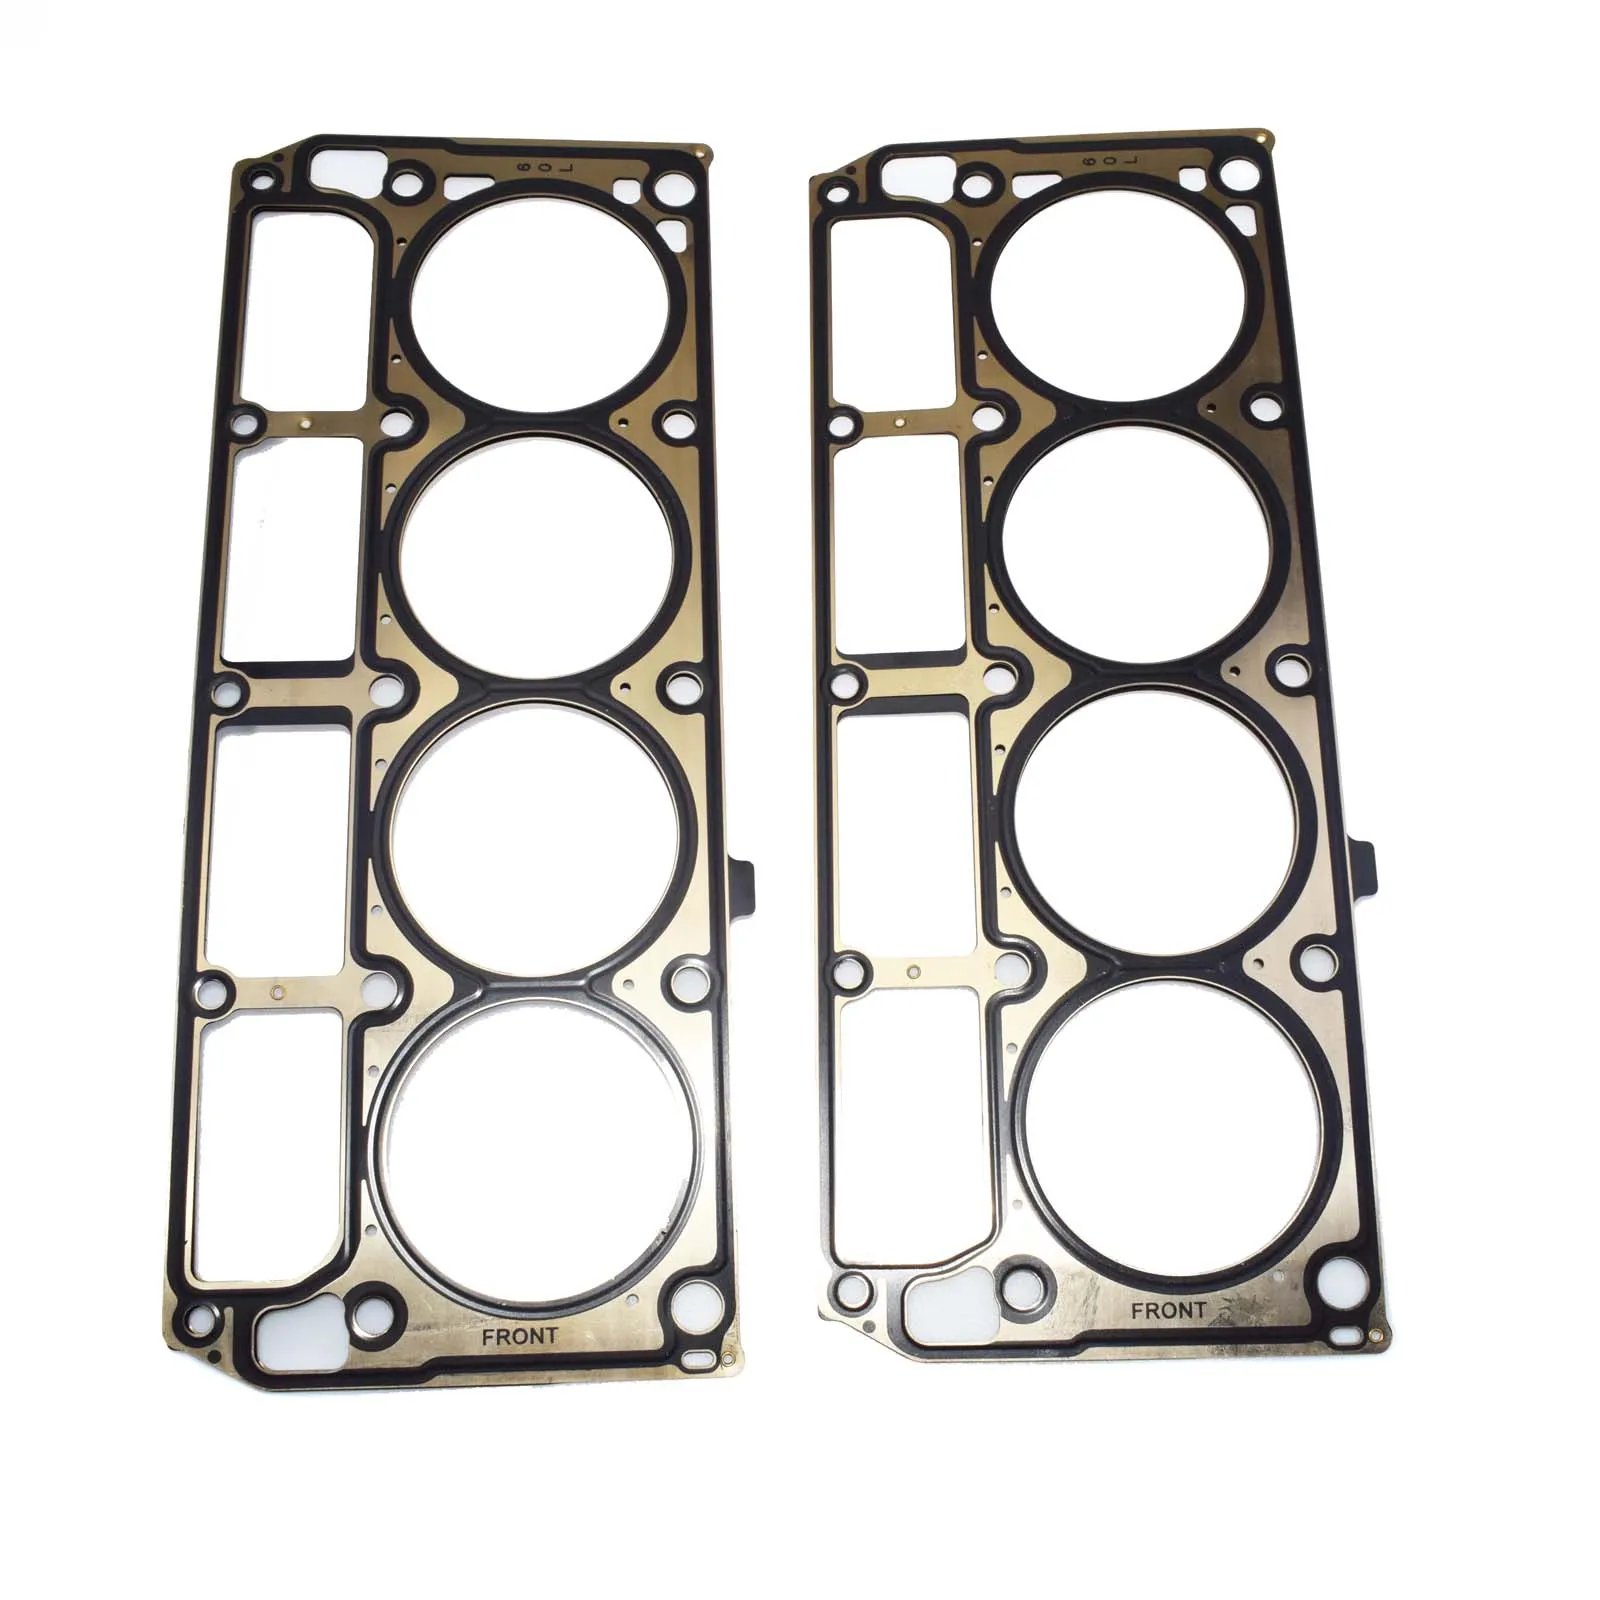 Wolfigo New Engine Cylinder Head Gasket 12589226 For Gmc Canyon Chevrolet  Express 1500 Tahoe Suburban Impala Cyl. Head  Valve Cover Gasket  AliExpress